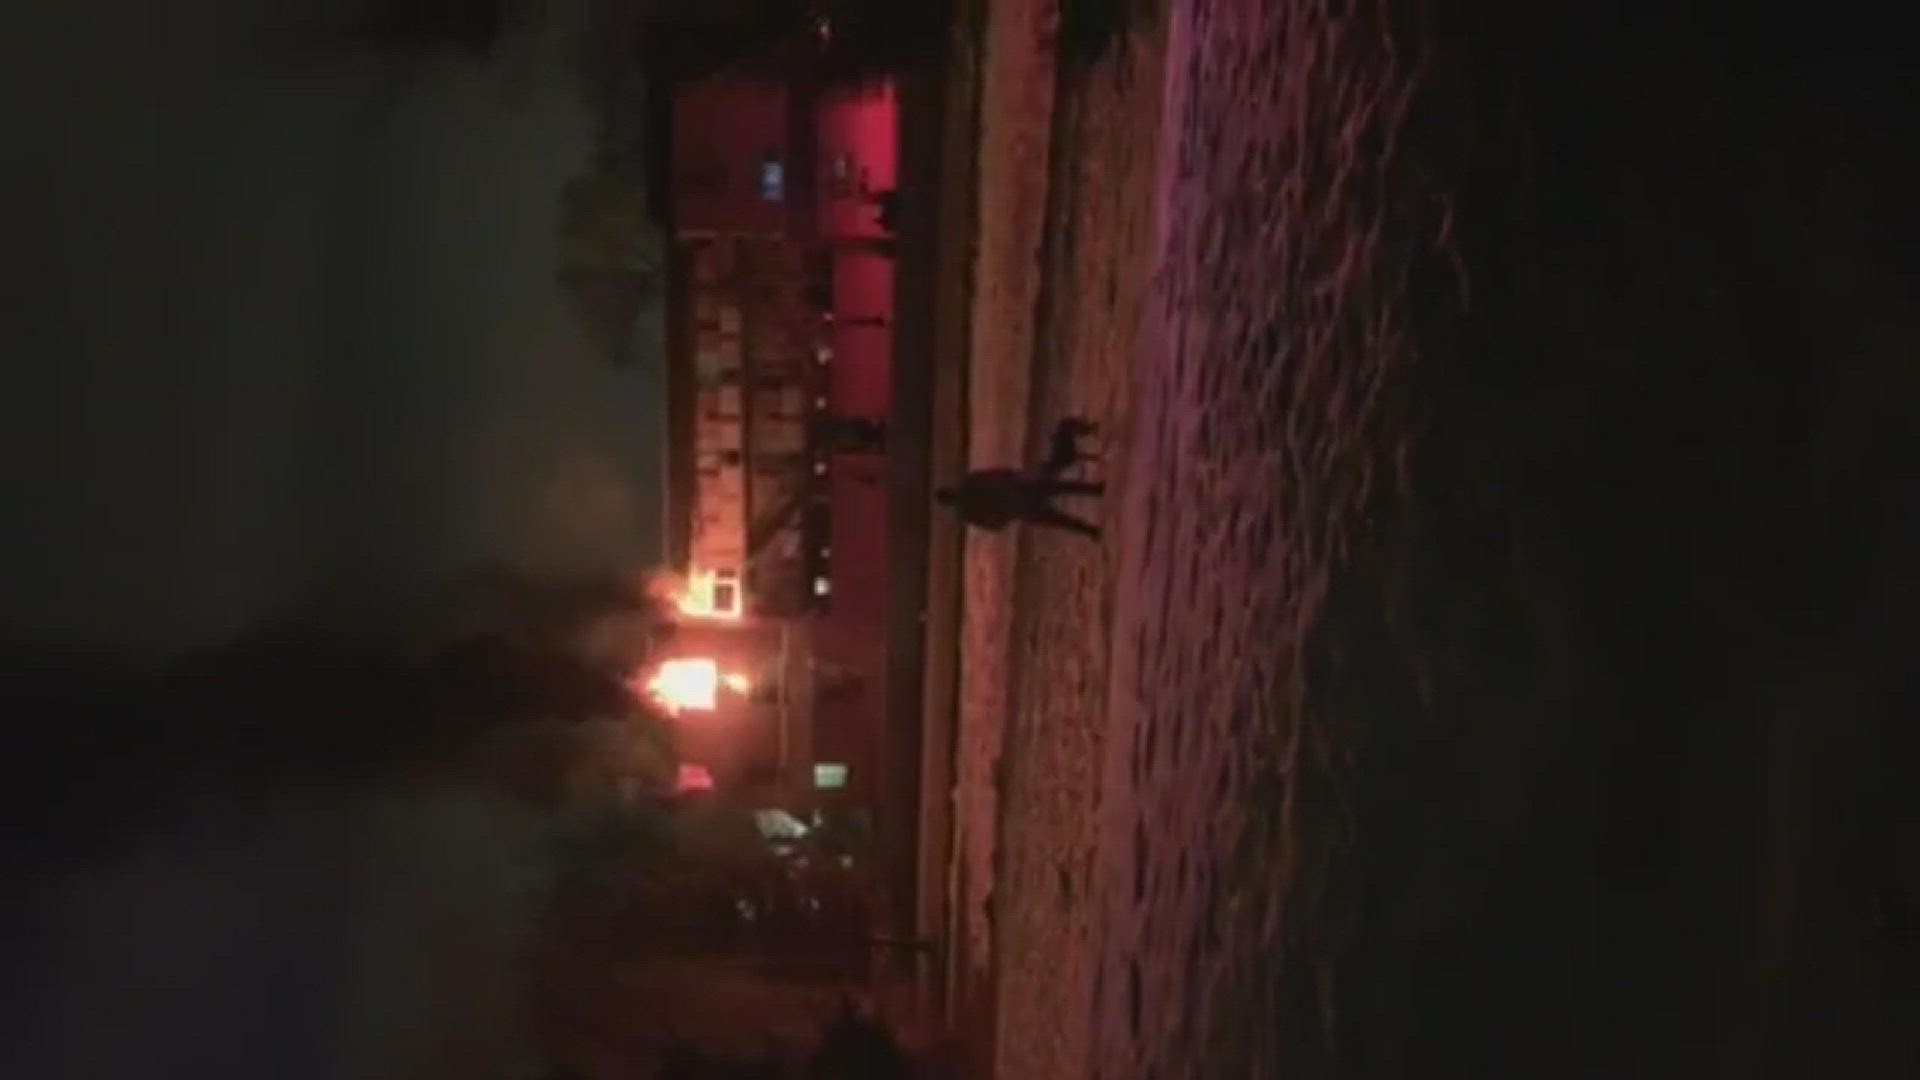 Denver firefighters say at least one person was hurt in an apartment fire Thursday night in Denver's University neighborhood. Video courtesy Meredith Olson.